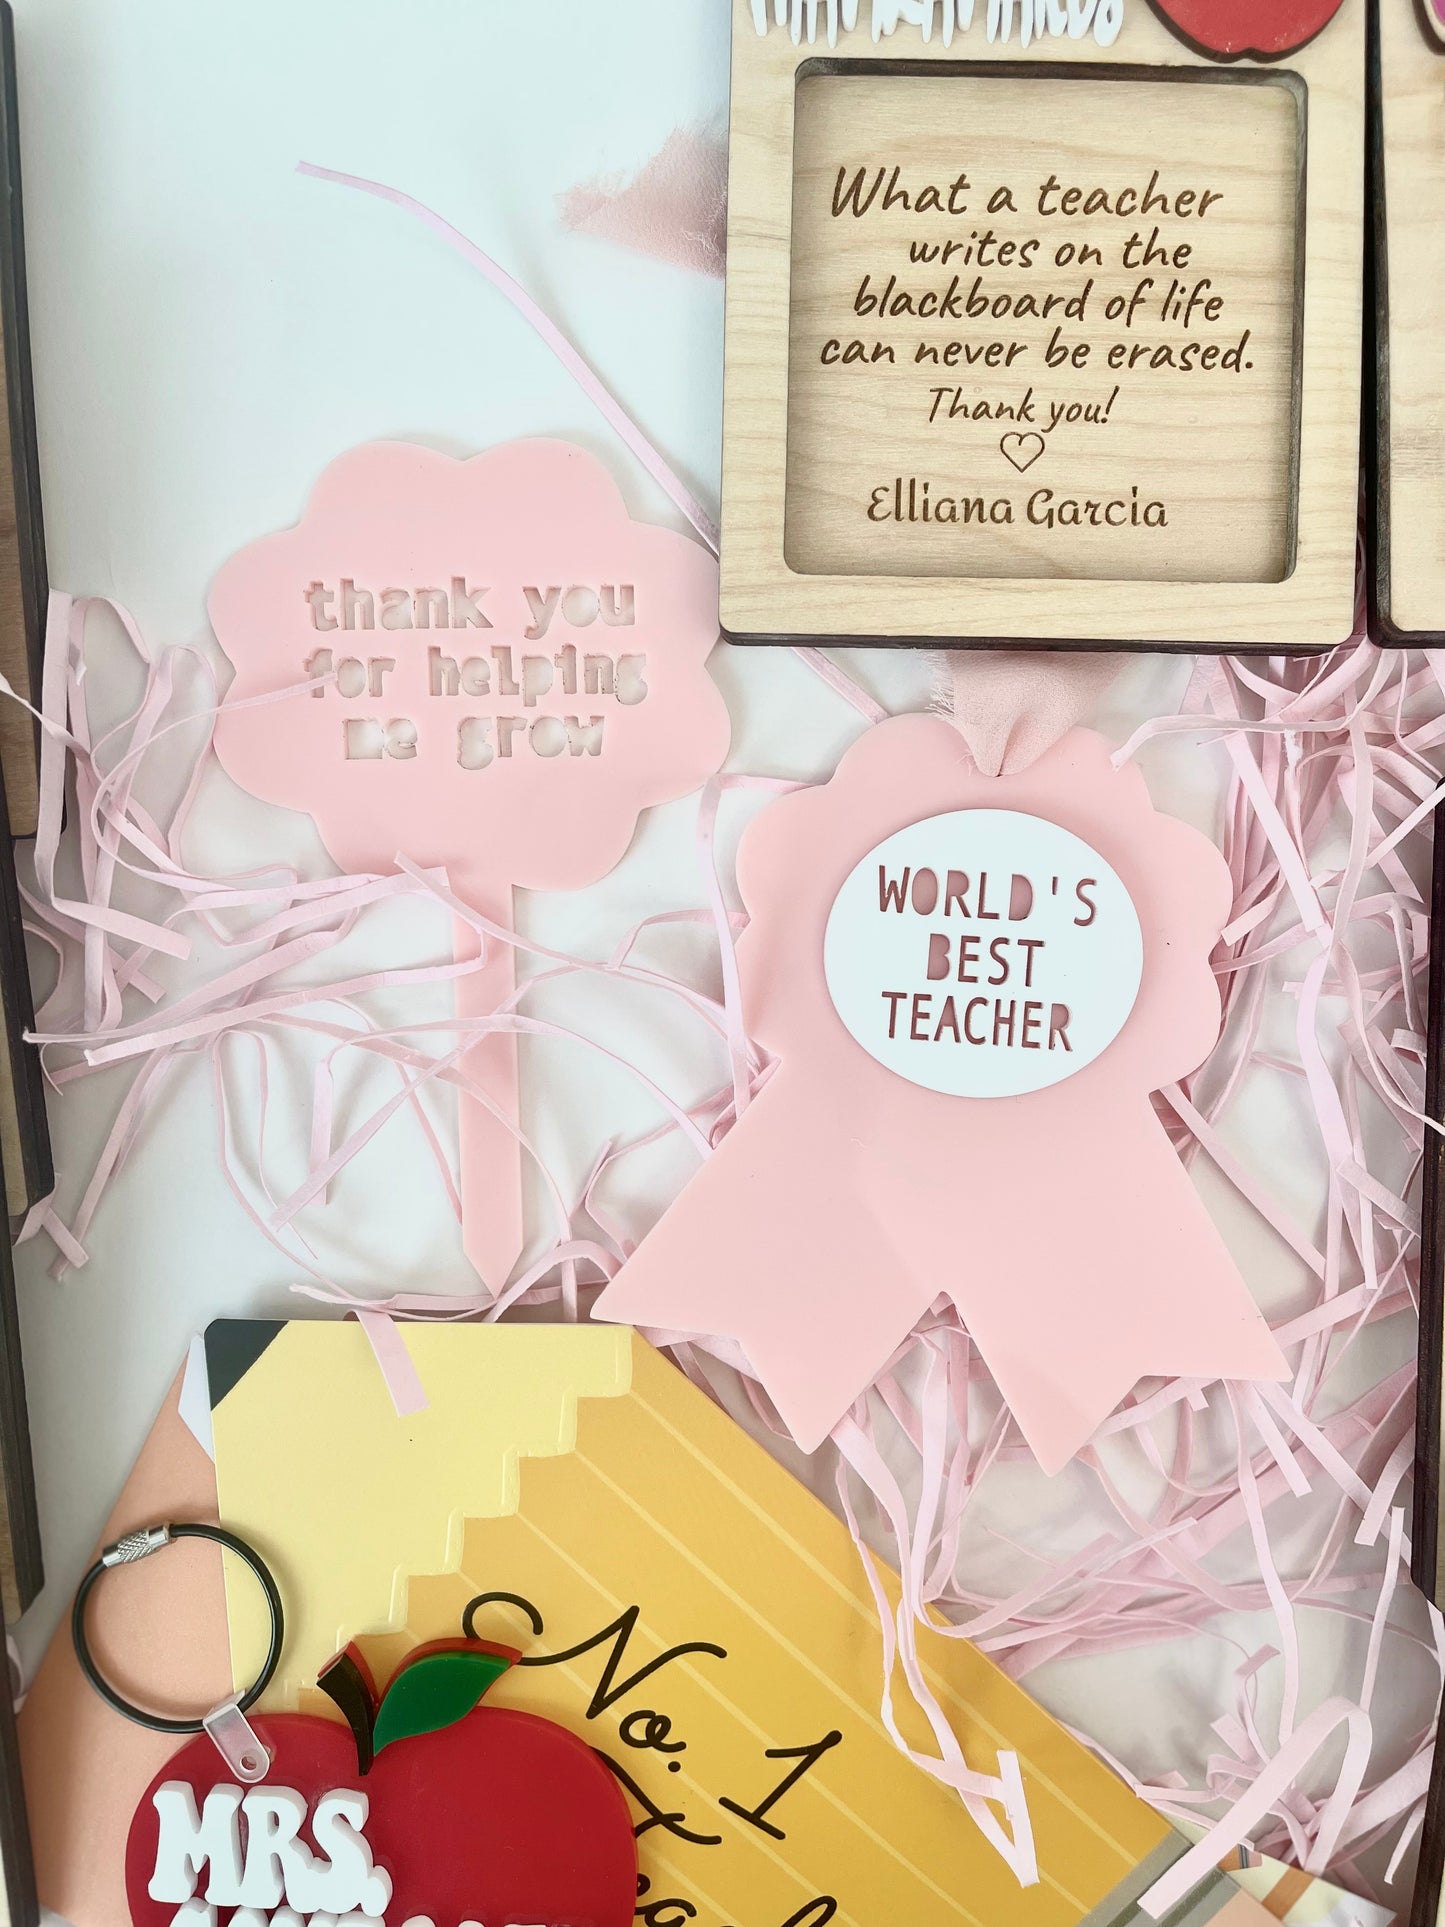 Personalized Teacher Gifts